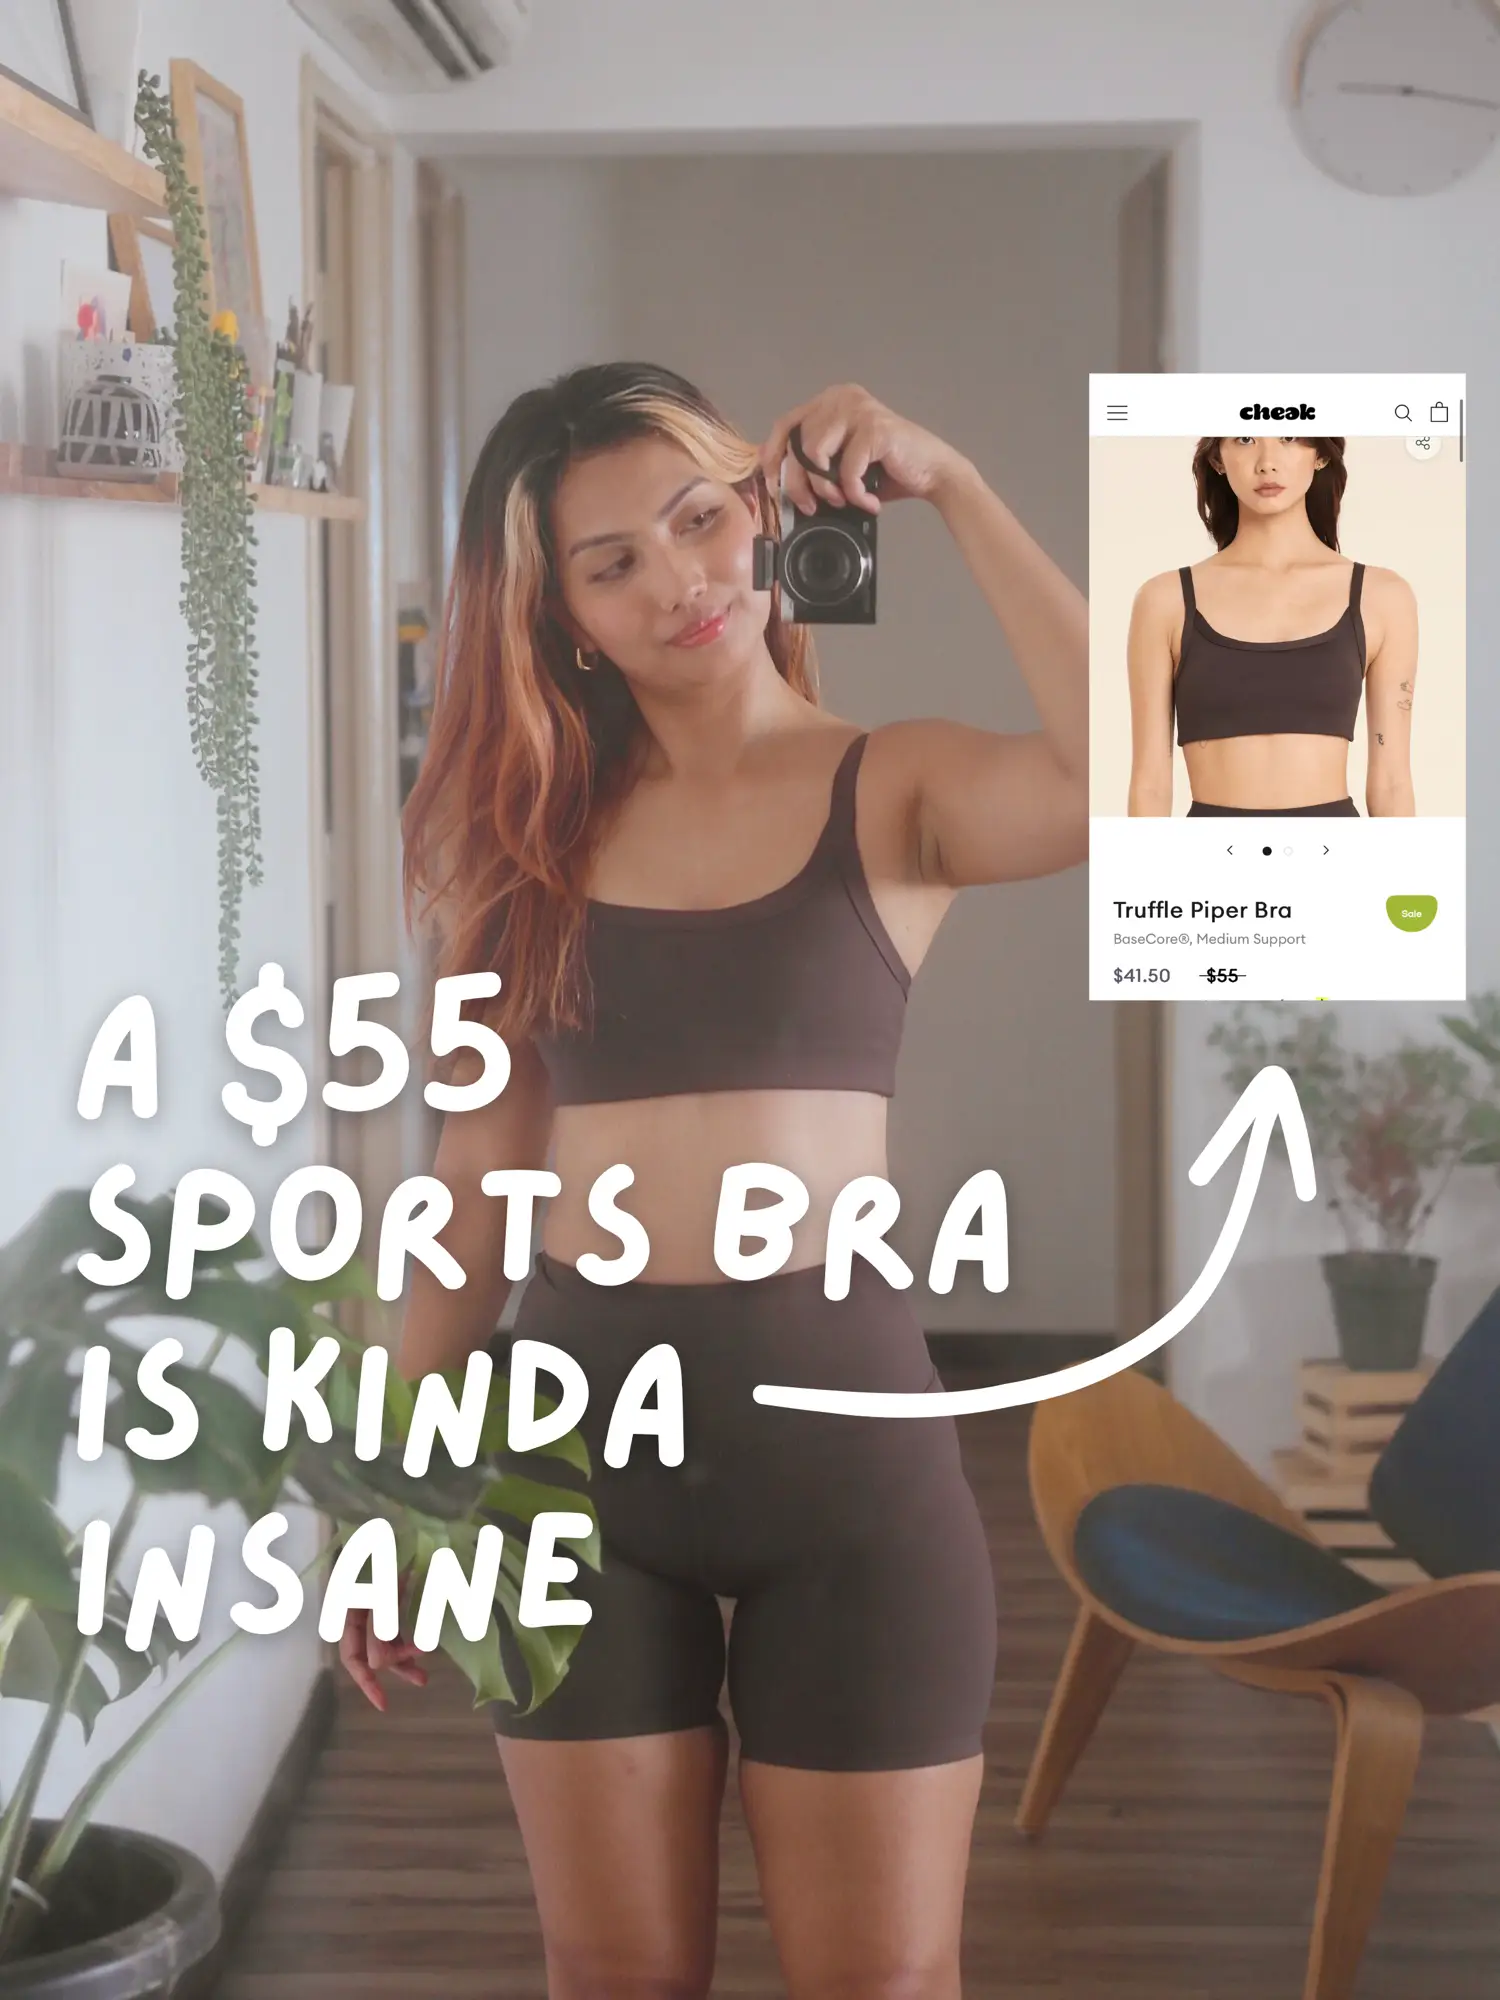 ⚠️ Why bralette is THE WORST bra?!, Gallery posted by Kristie ✨